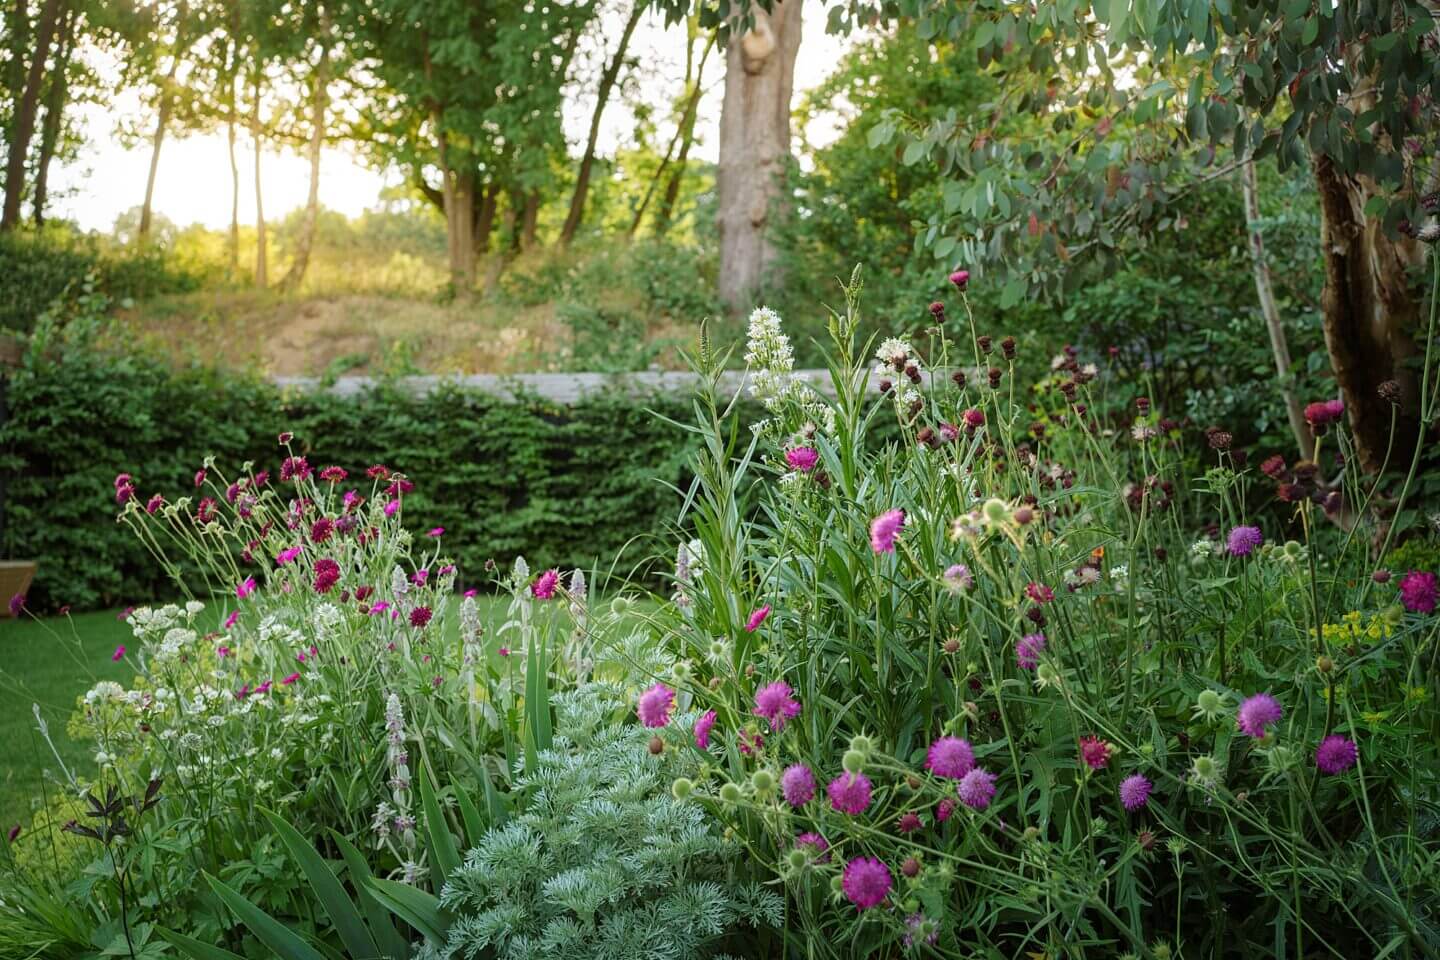 Urban Essex garden at sunset with astrantia and knautia designed by Coralie Estrade